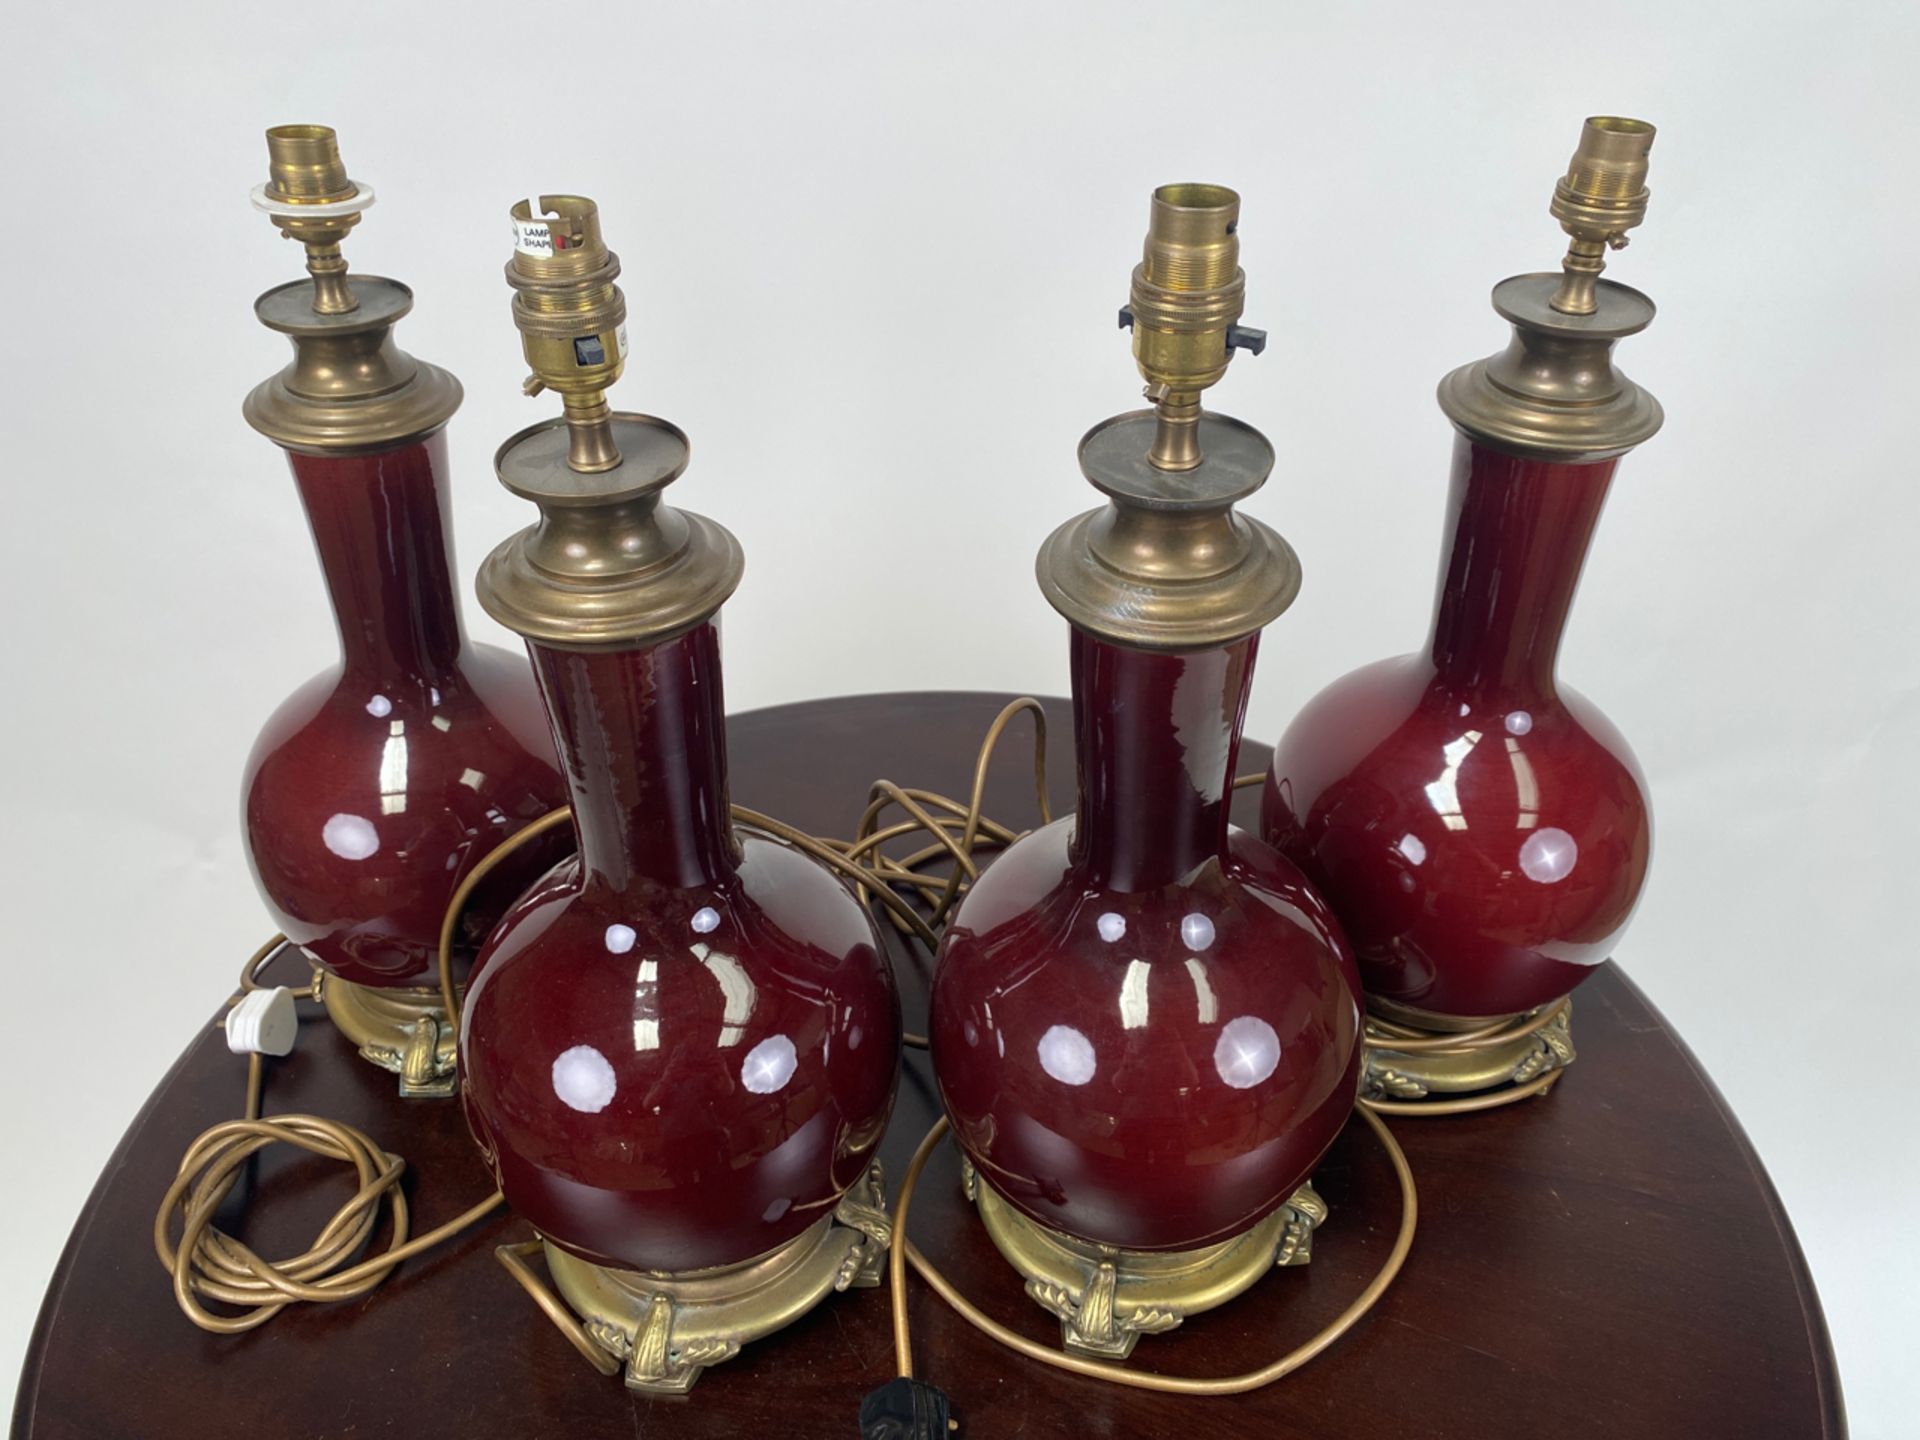 Set of 4 Ceramic Table Lamps - Image 3 of 4